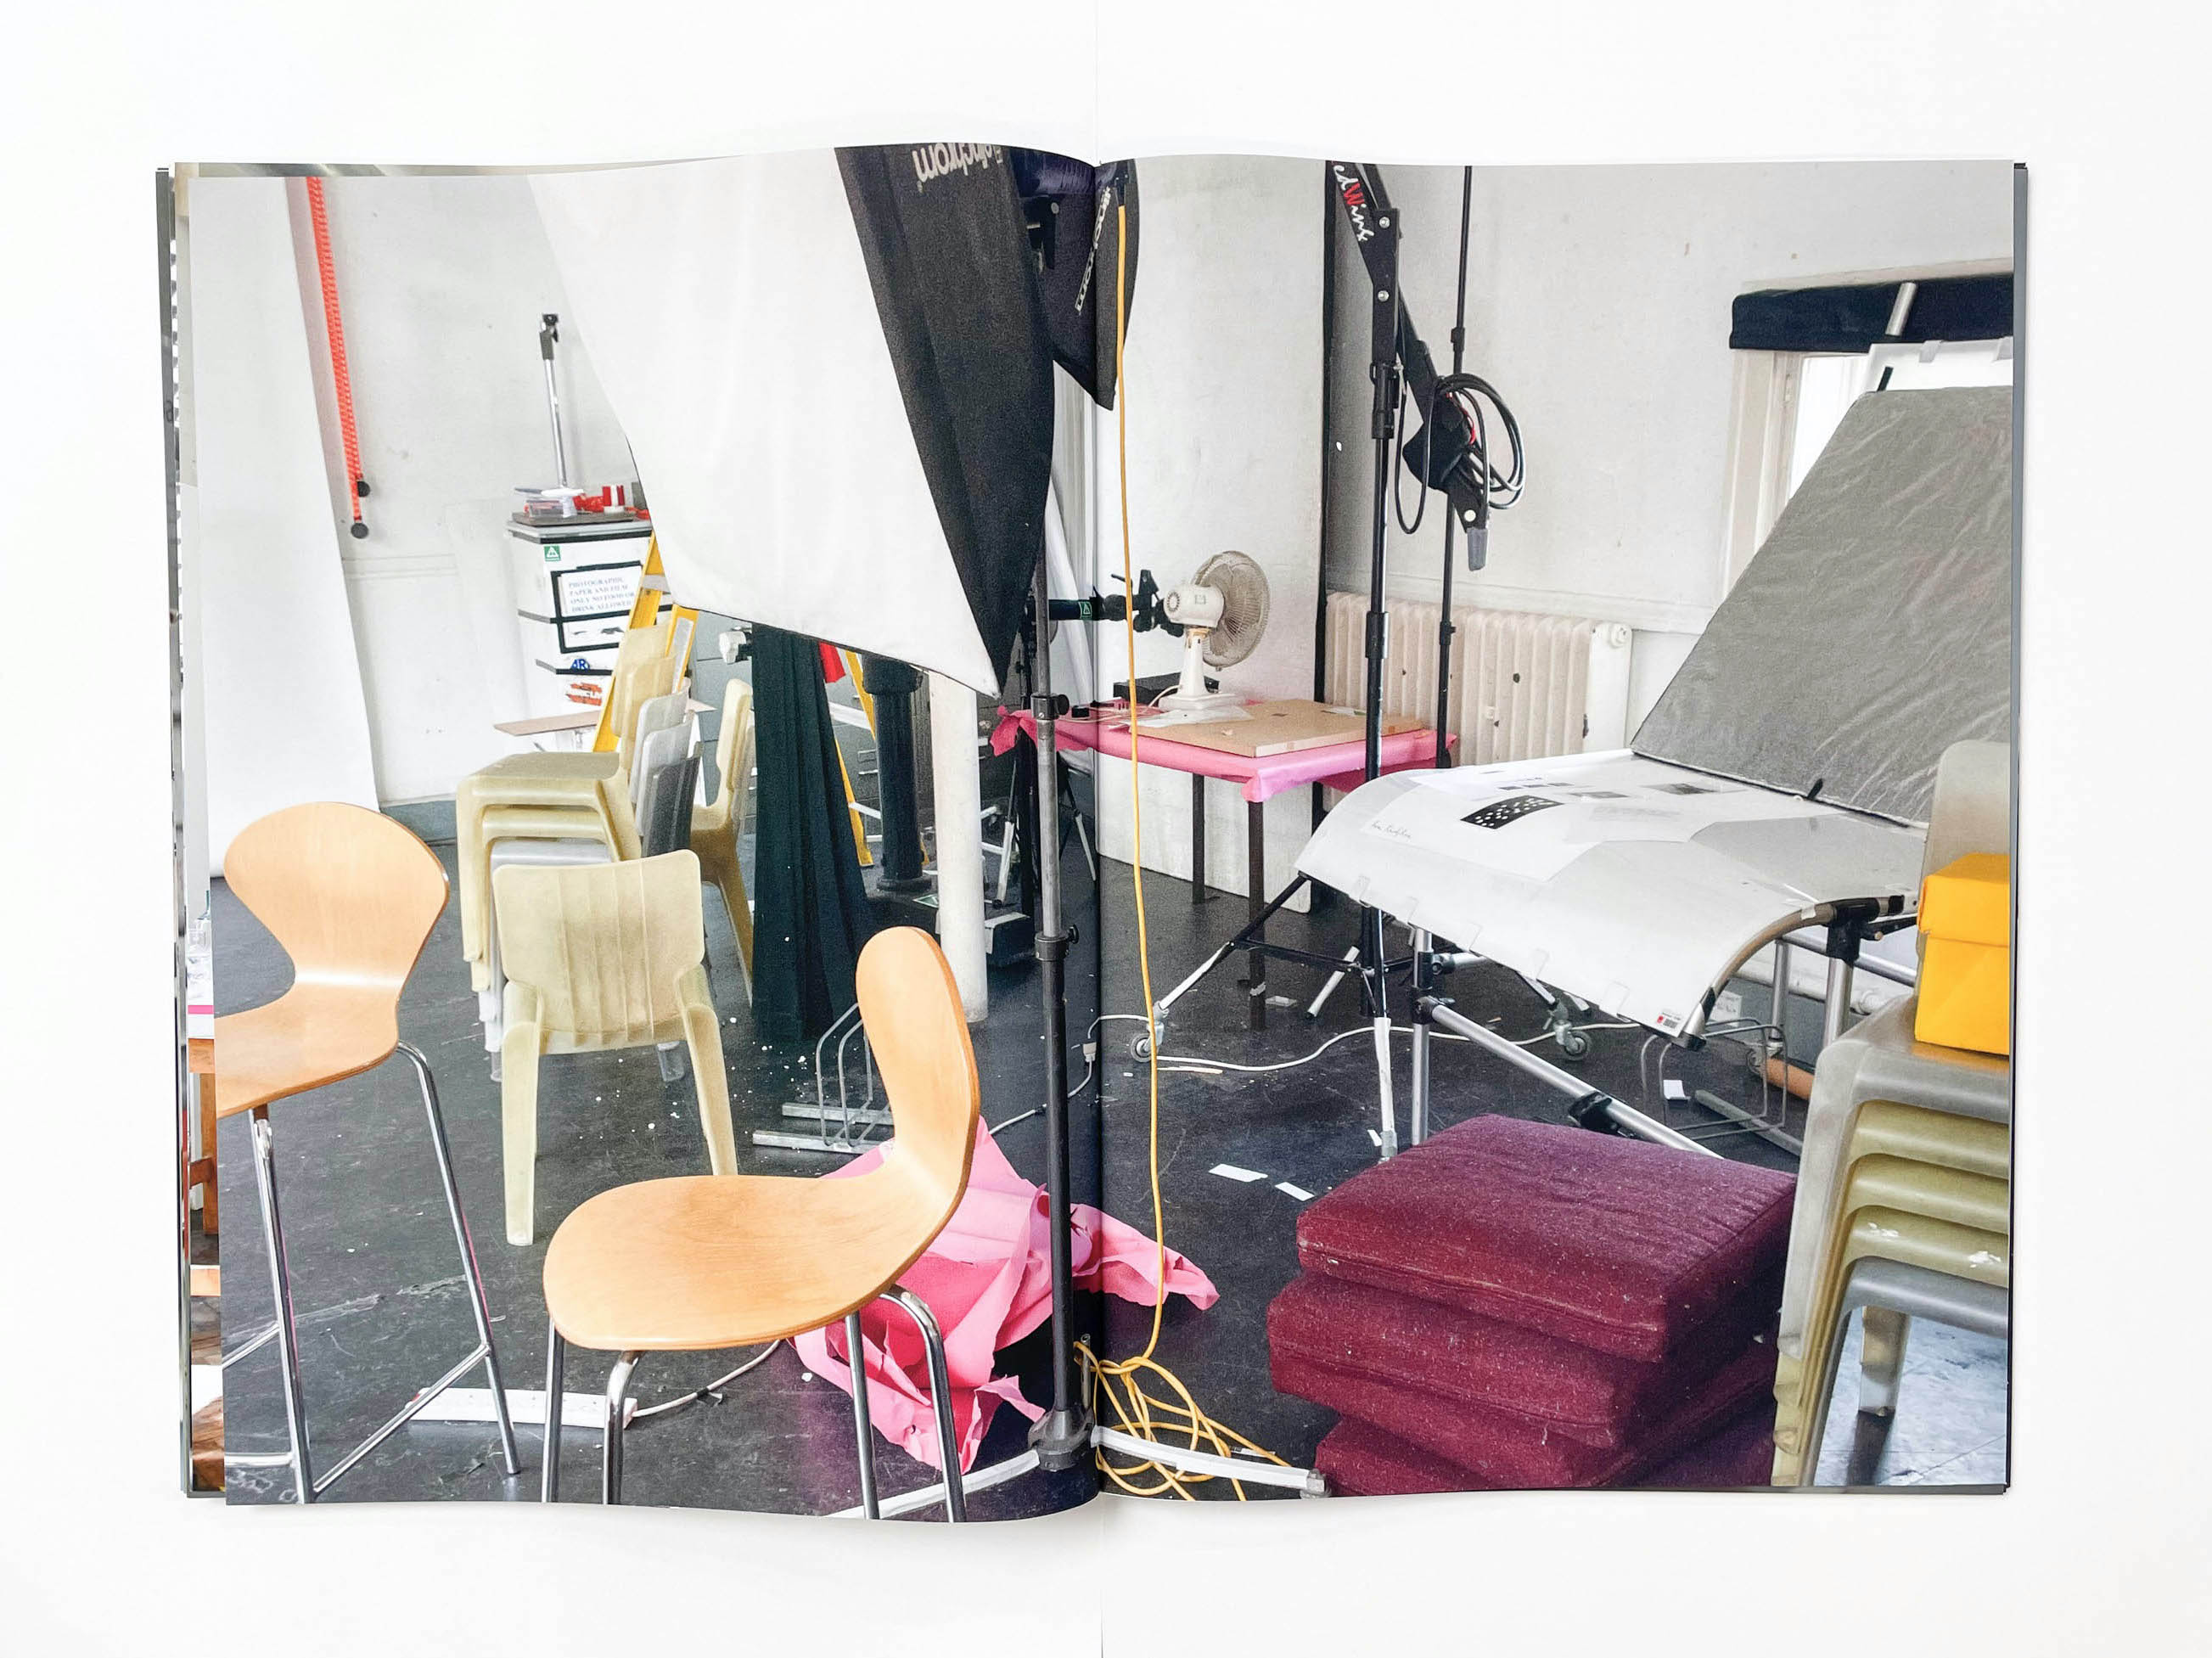 a chaotic photographic studio filled with chairs and equipment